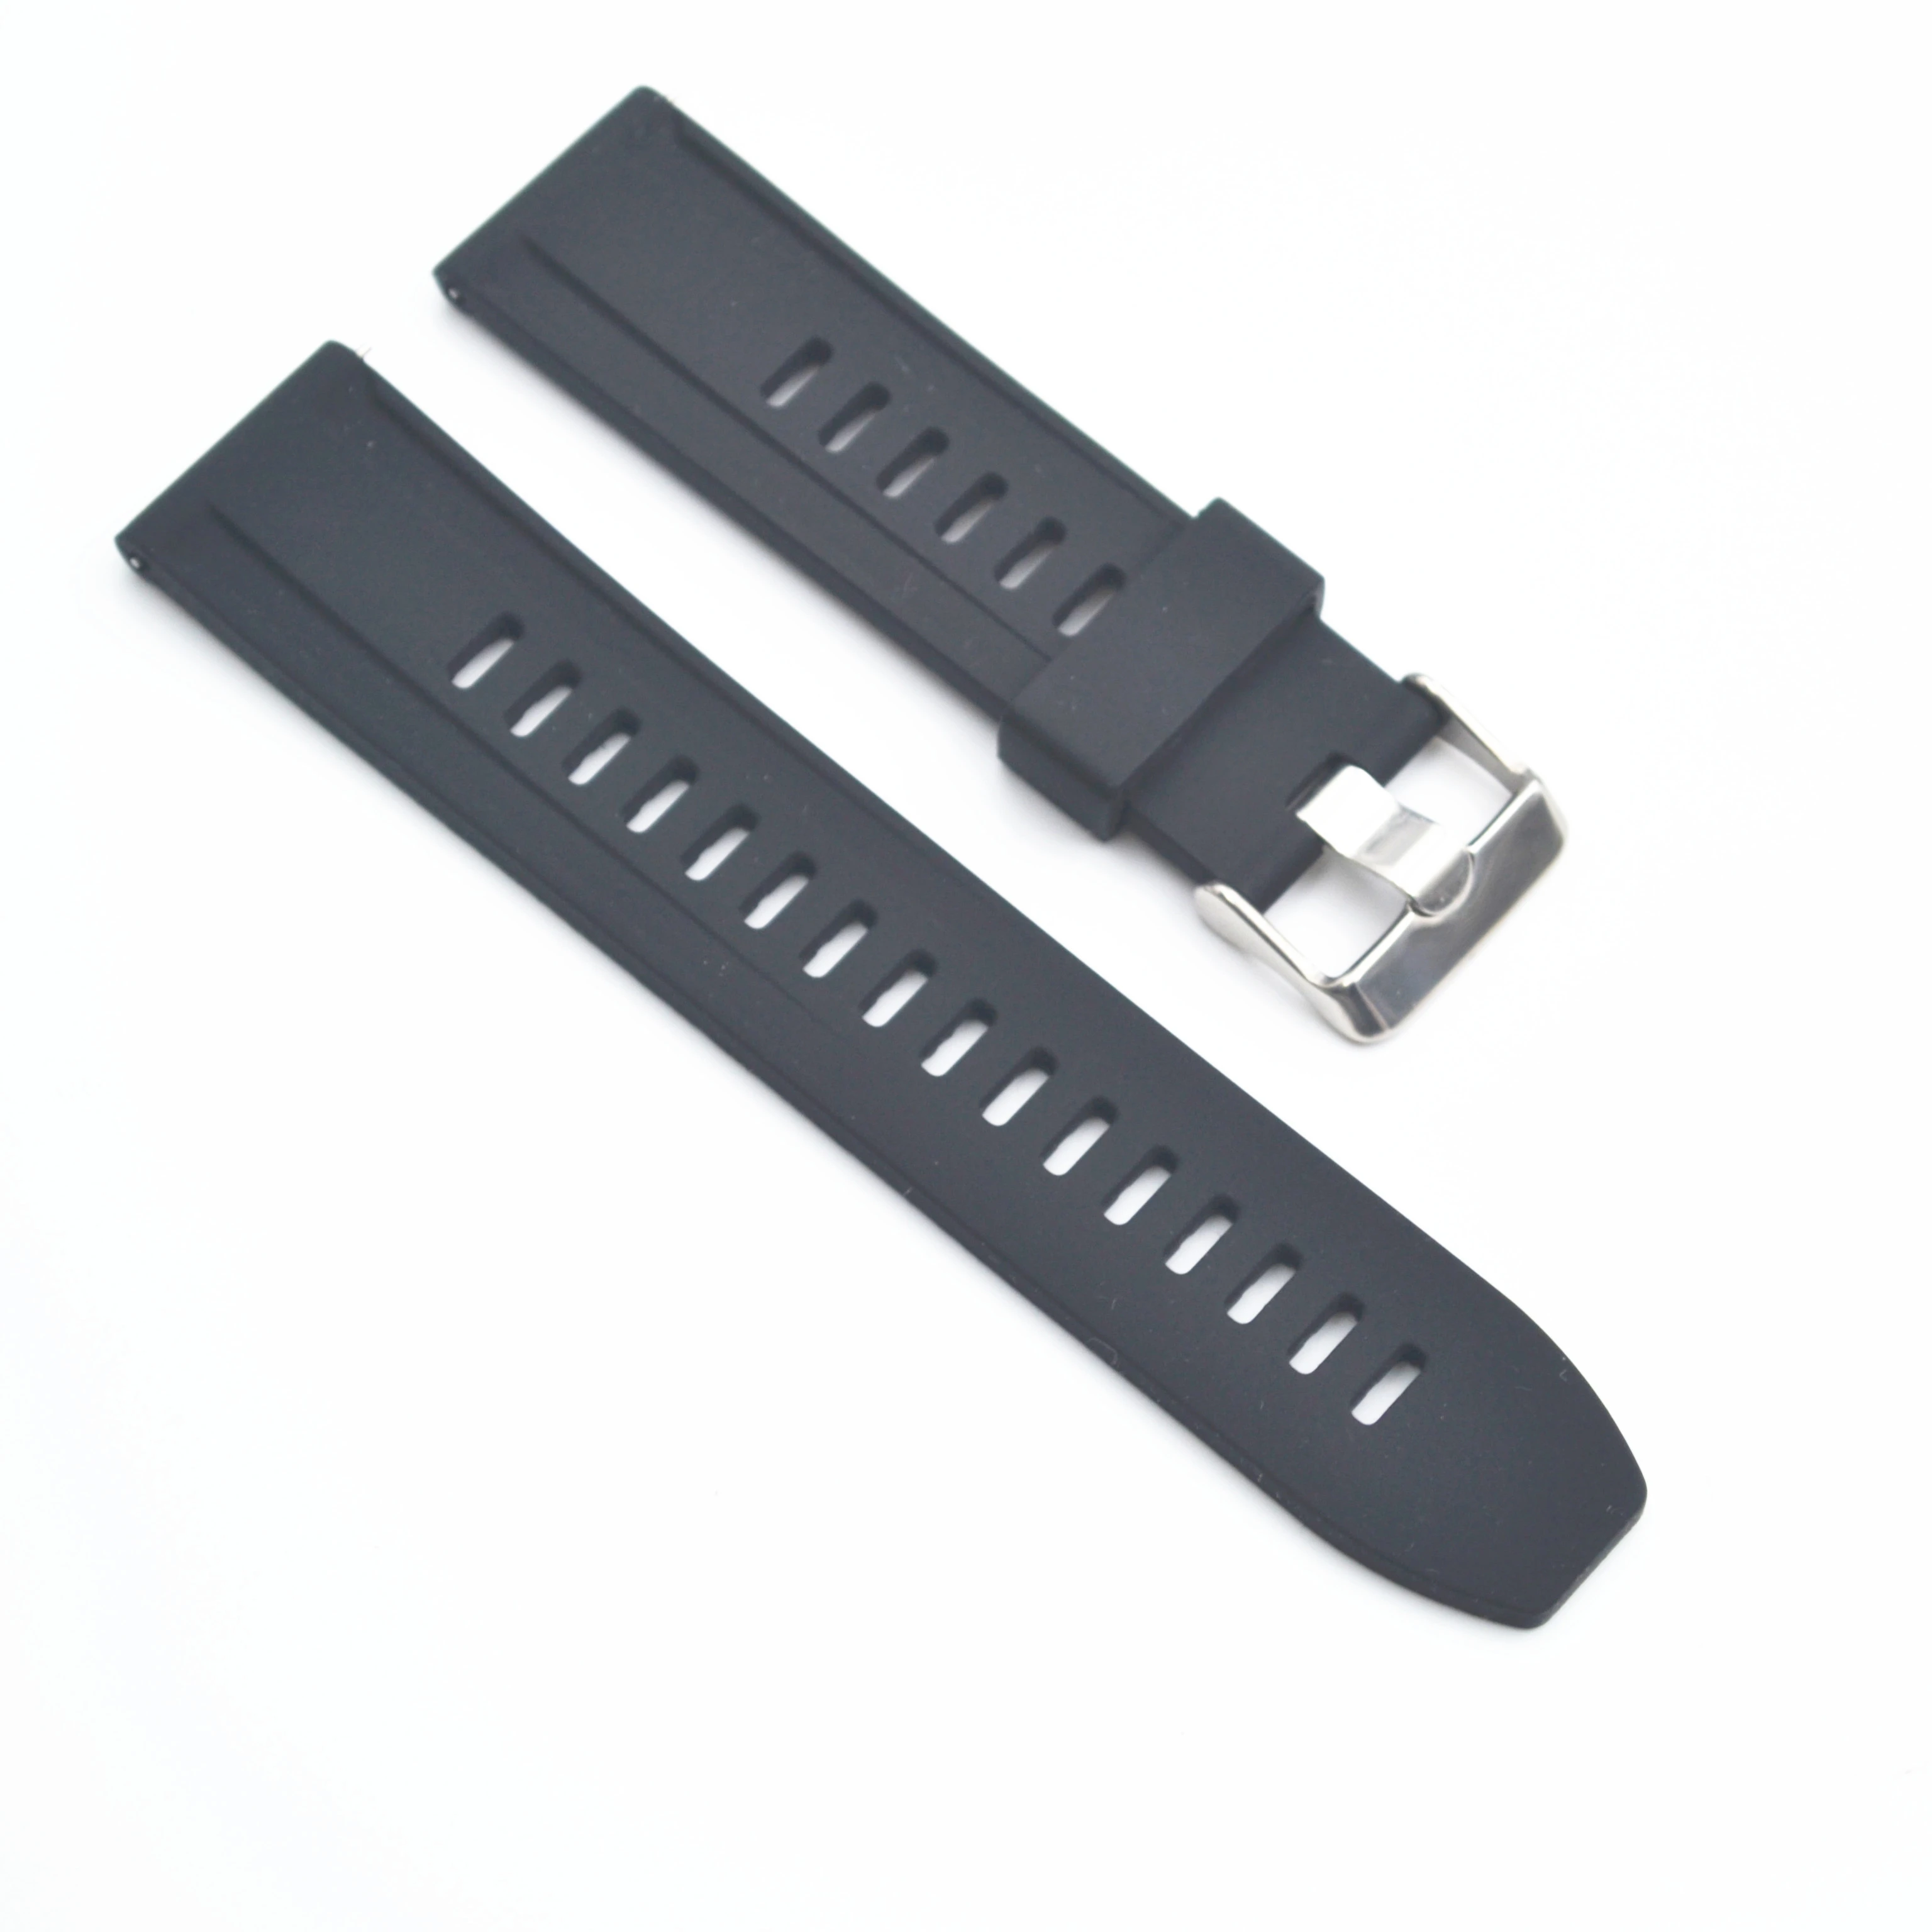 New arrival transparent silicone watch strap with quick release for smart watch band